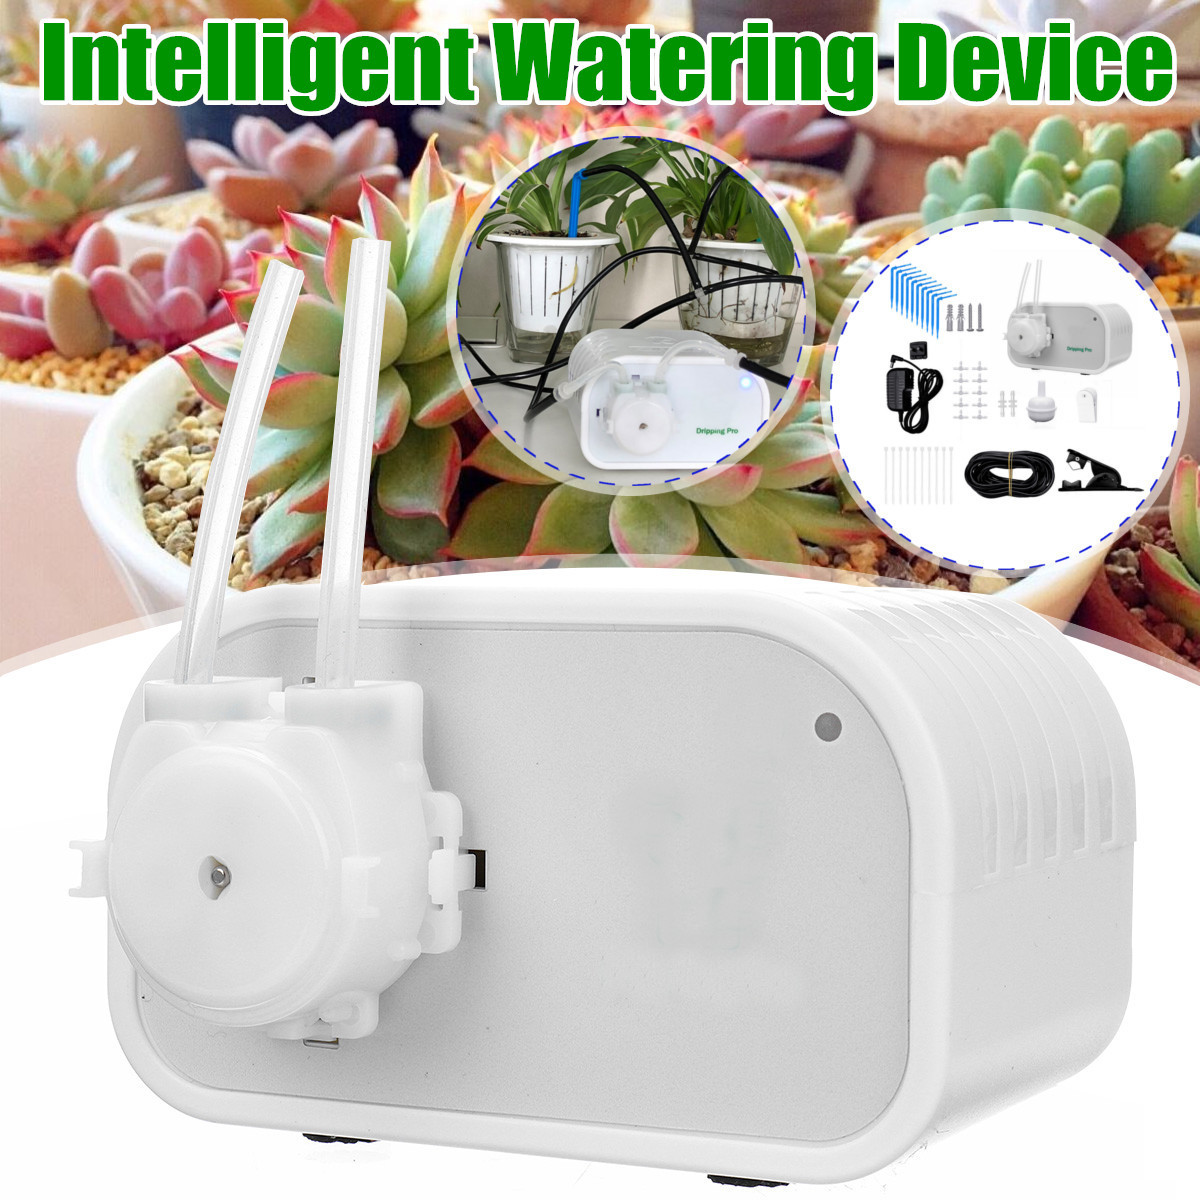 Intelligent-Watering-Device-Mobile-Phone-Control-Automatic-Drip-Irrigation-Kit-Garden-Potted-Plant-1707572-2